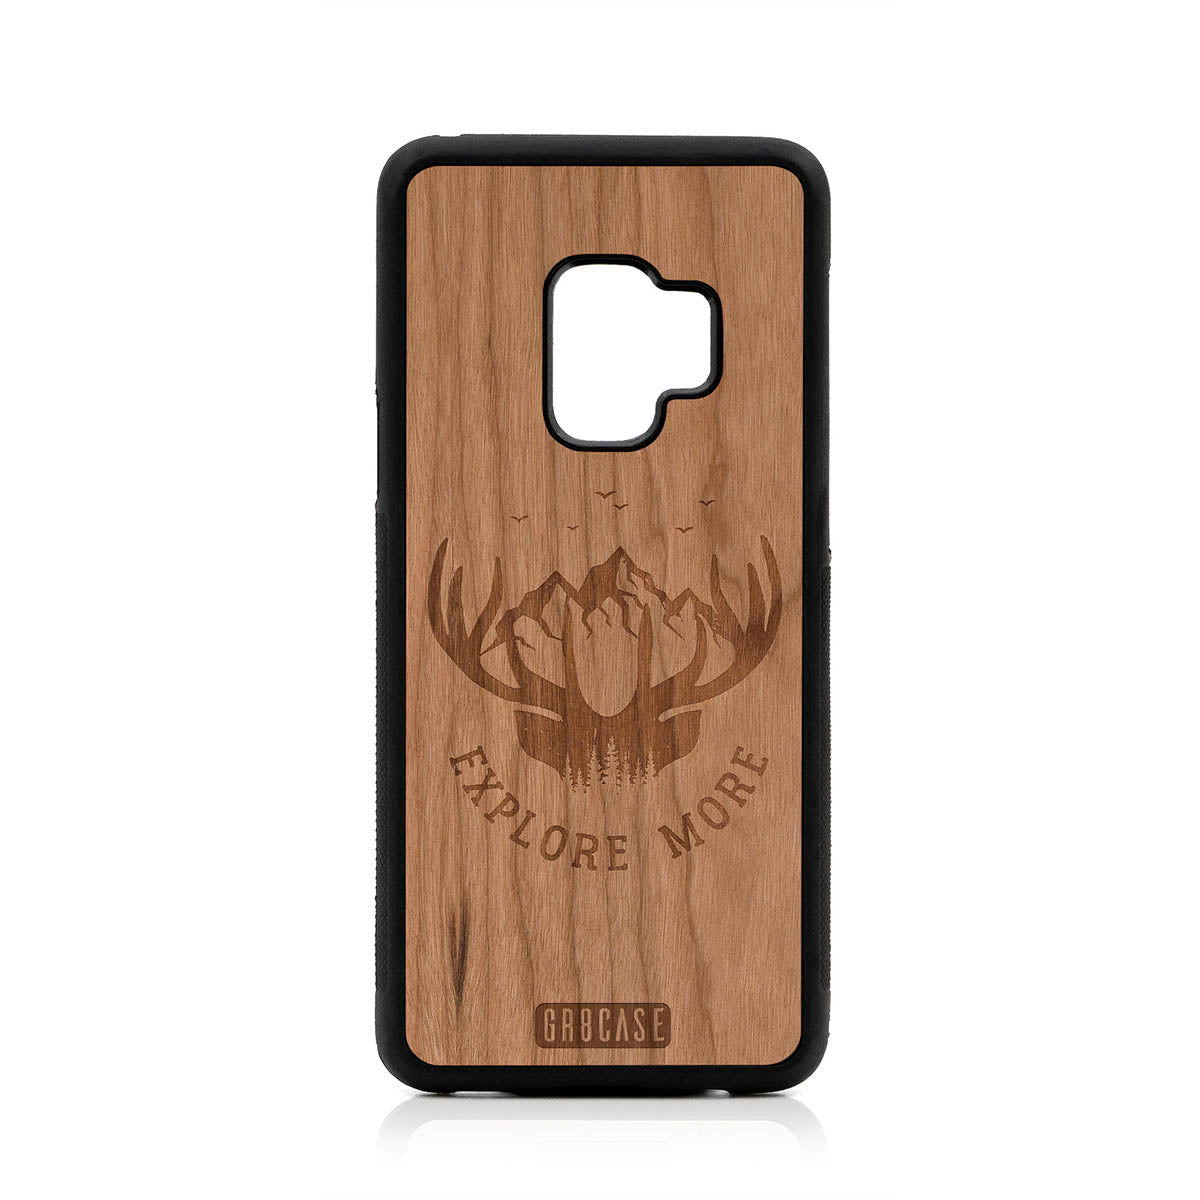 Explore More (Forest, Mountains & Antlers) Design Wood Case For Samsung Galaxy S9 by GR8CASE